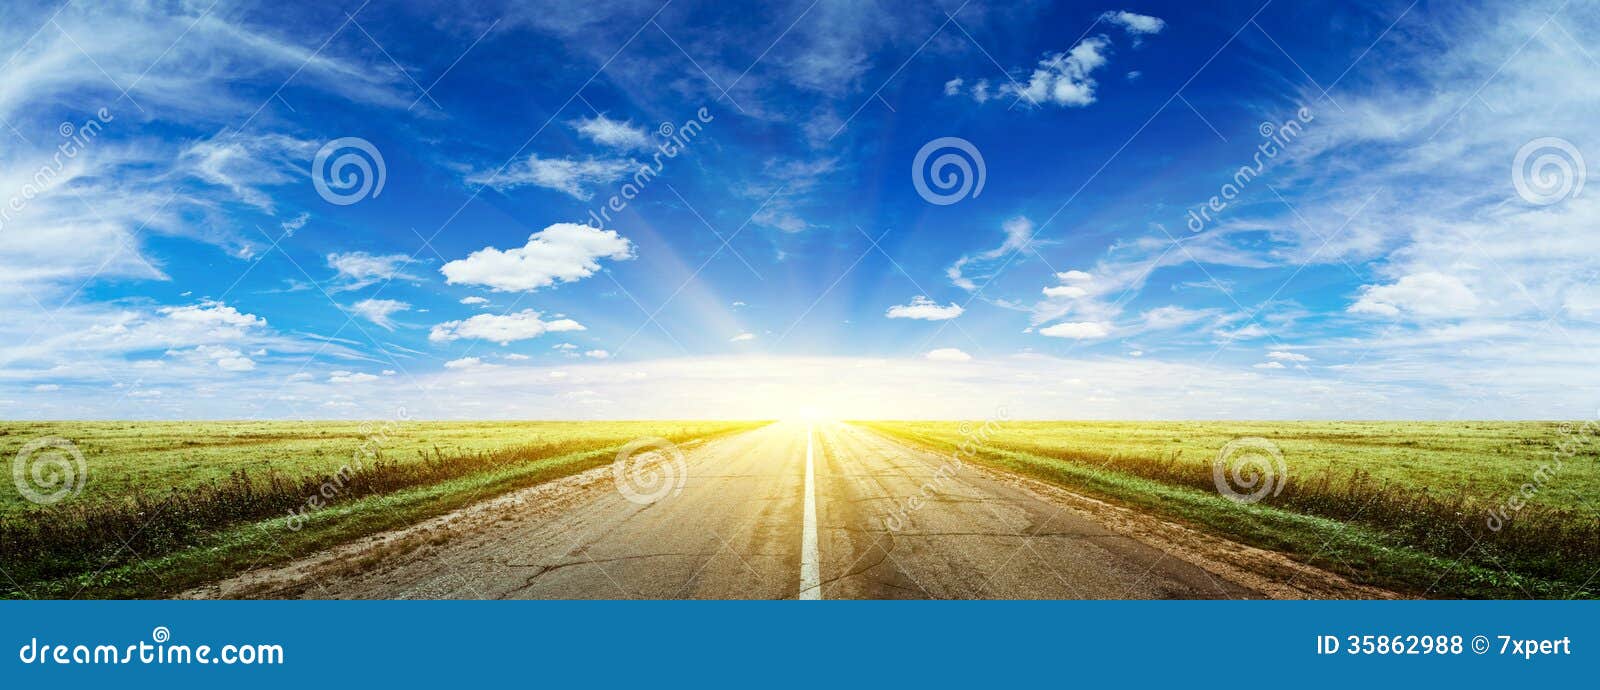 458,499 Summer Road Background Stock Photos - Free & Royalty-Free ...